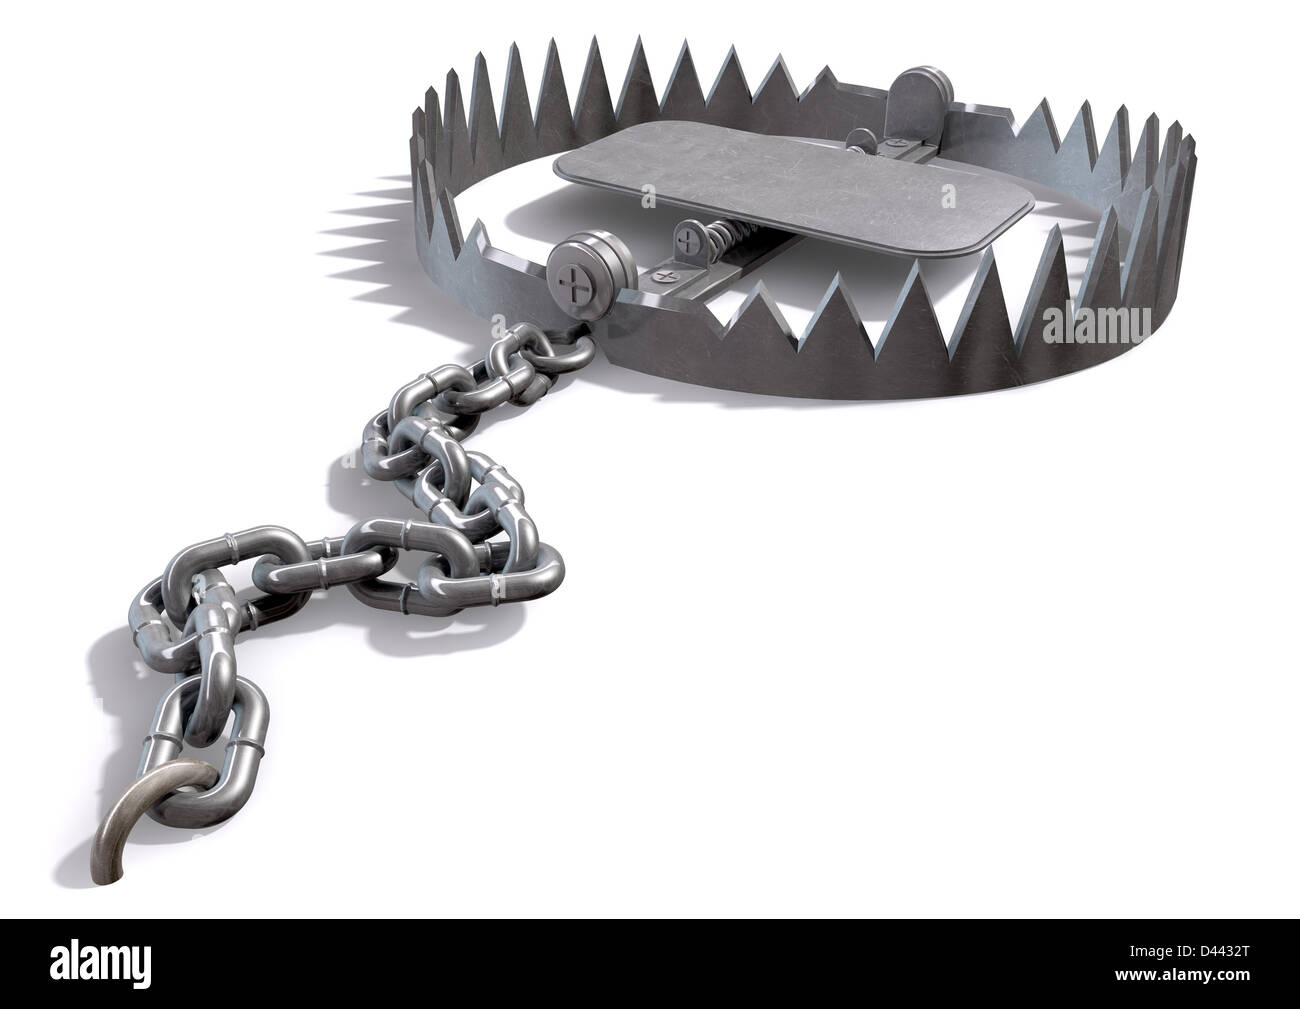 https://c8.alamy.com/comp/D4432T/a-metal-animal-trap-that-is-open-attached-to-the-ground-with-a-metal-D4432T.jpg